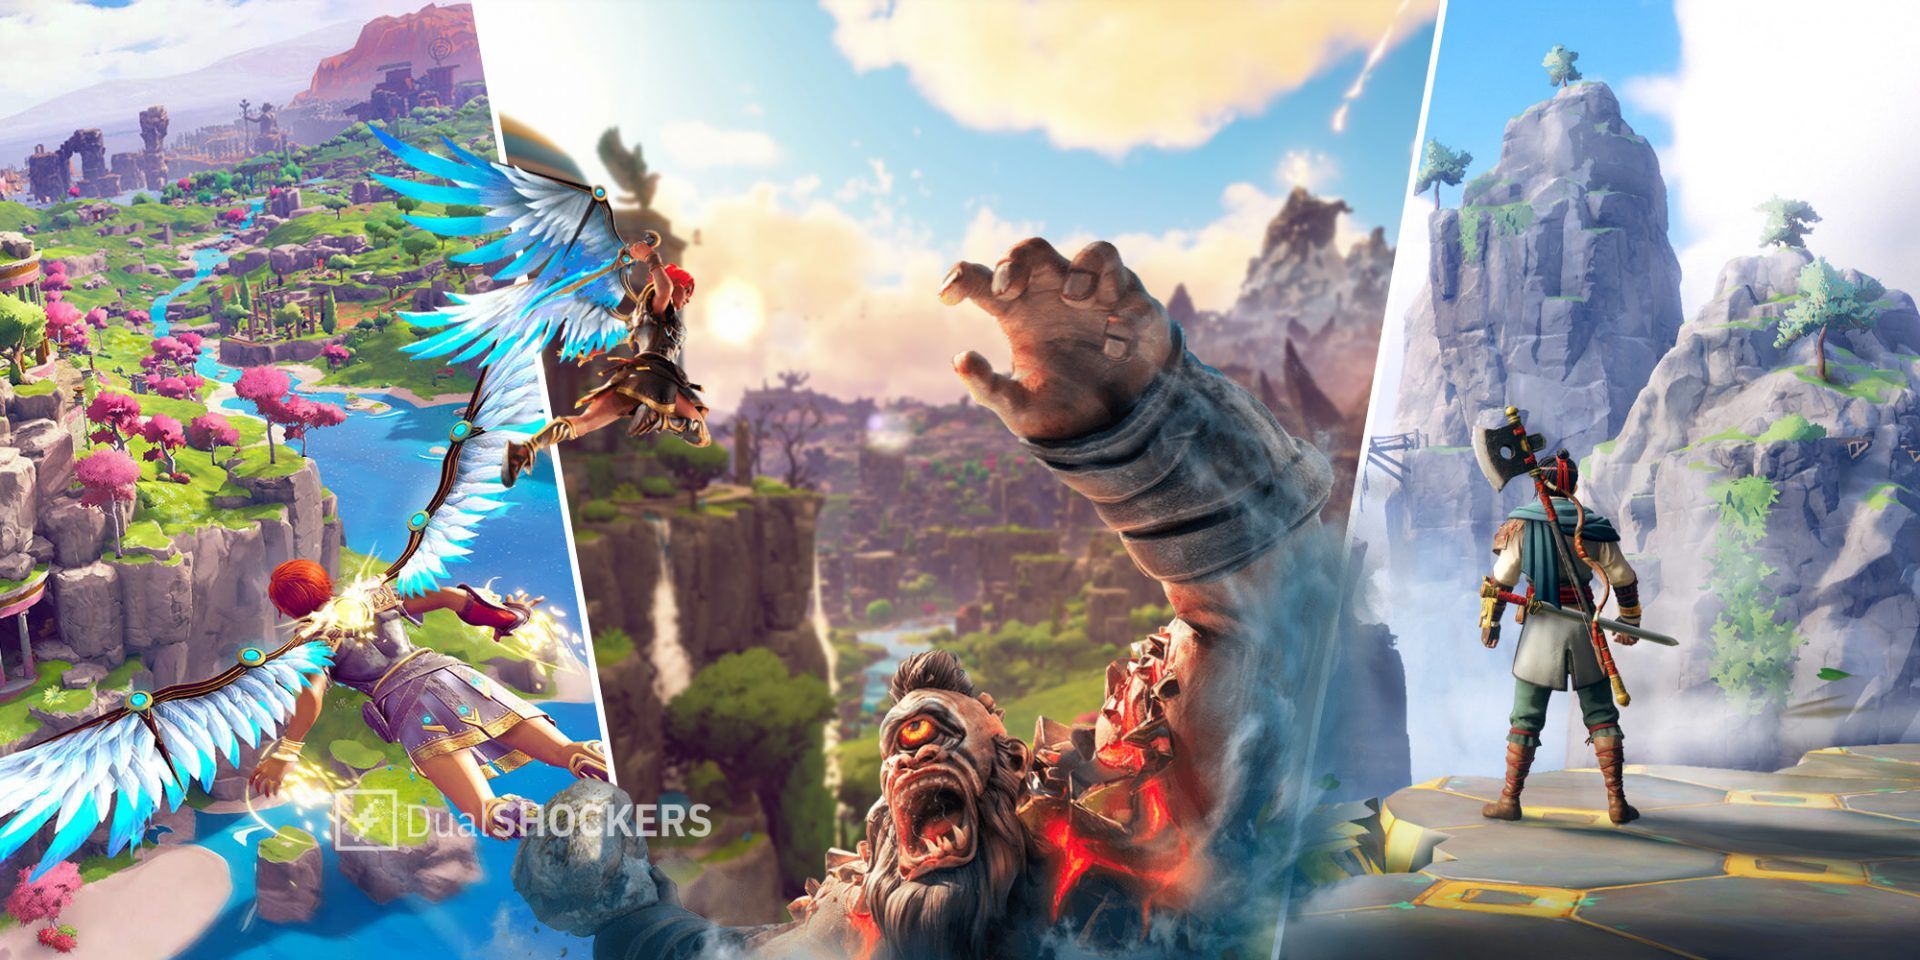 Immortals Fenyx Rising Fenyx flying in the air on left, Fenyx fighting a cyclops in middle, character looking at the landscape on right